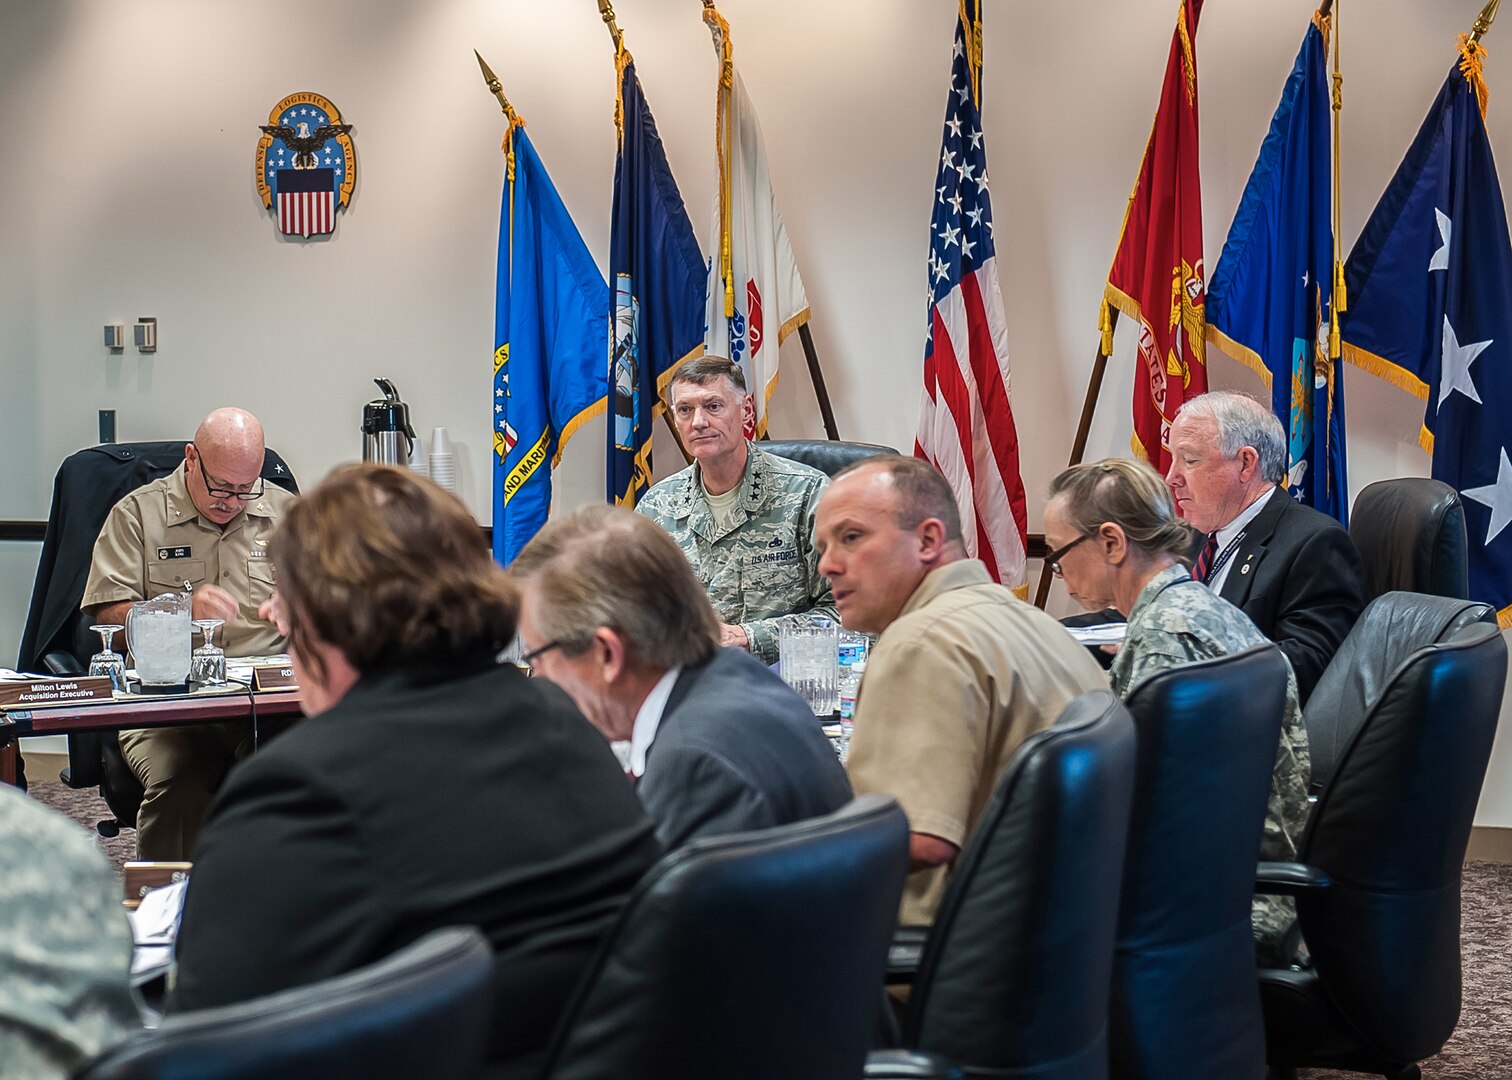 Air Force Lt. Gen. Andy Busch, DLA Director, was presented Land and Maritime’s Annual Operating Plan Oct. 29 inside Building 20 on Defense Supply Center Columbus. Leaders from across the organization briefed him on the organization’s major strategic and operational objectives.